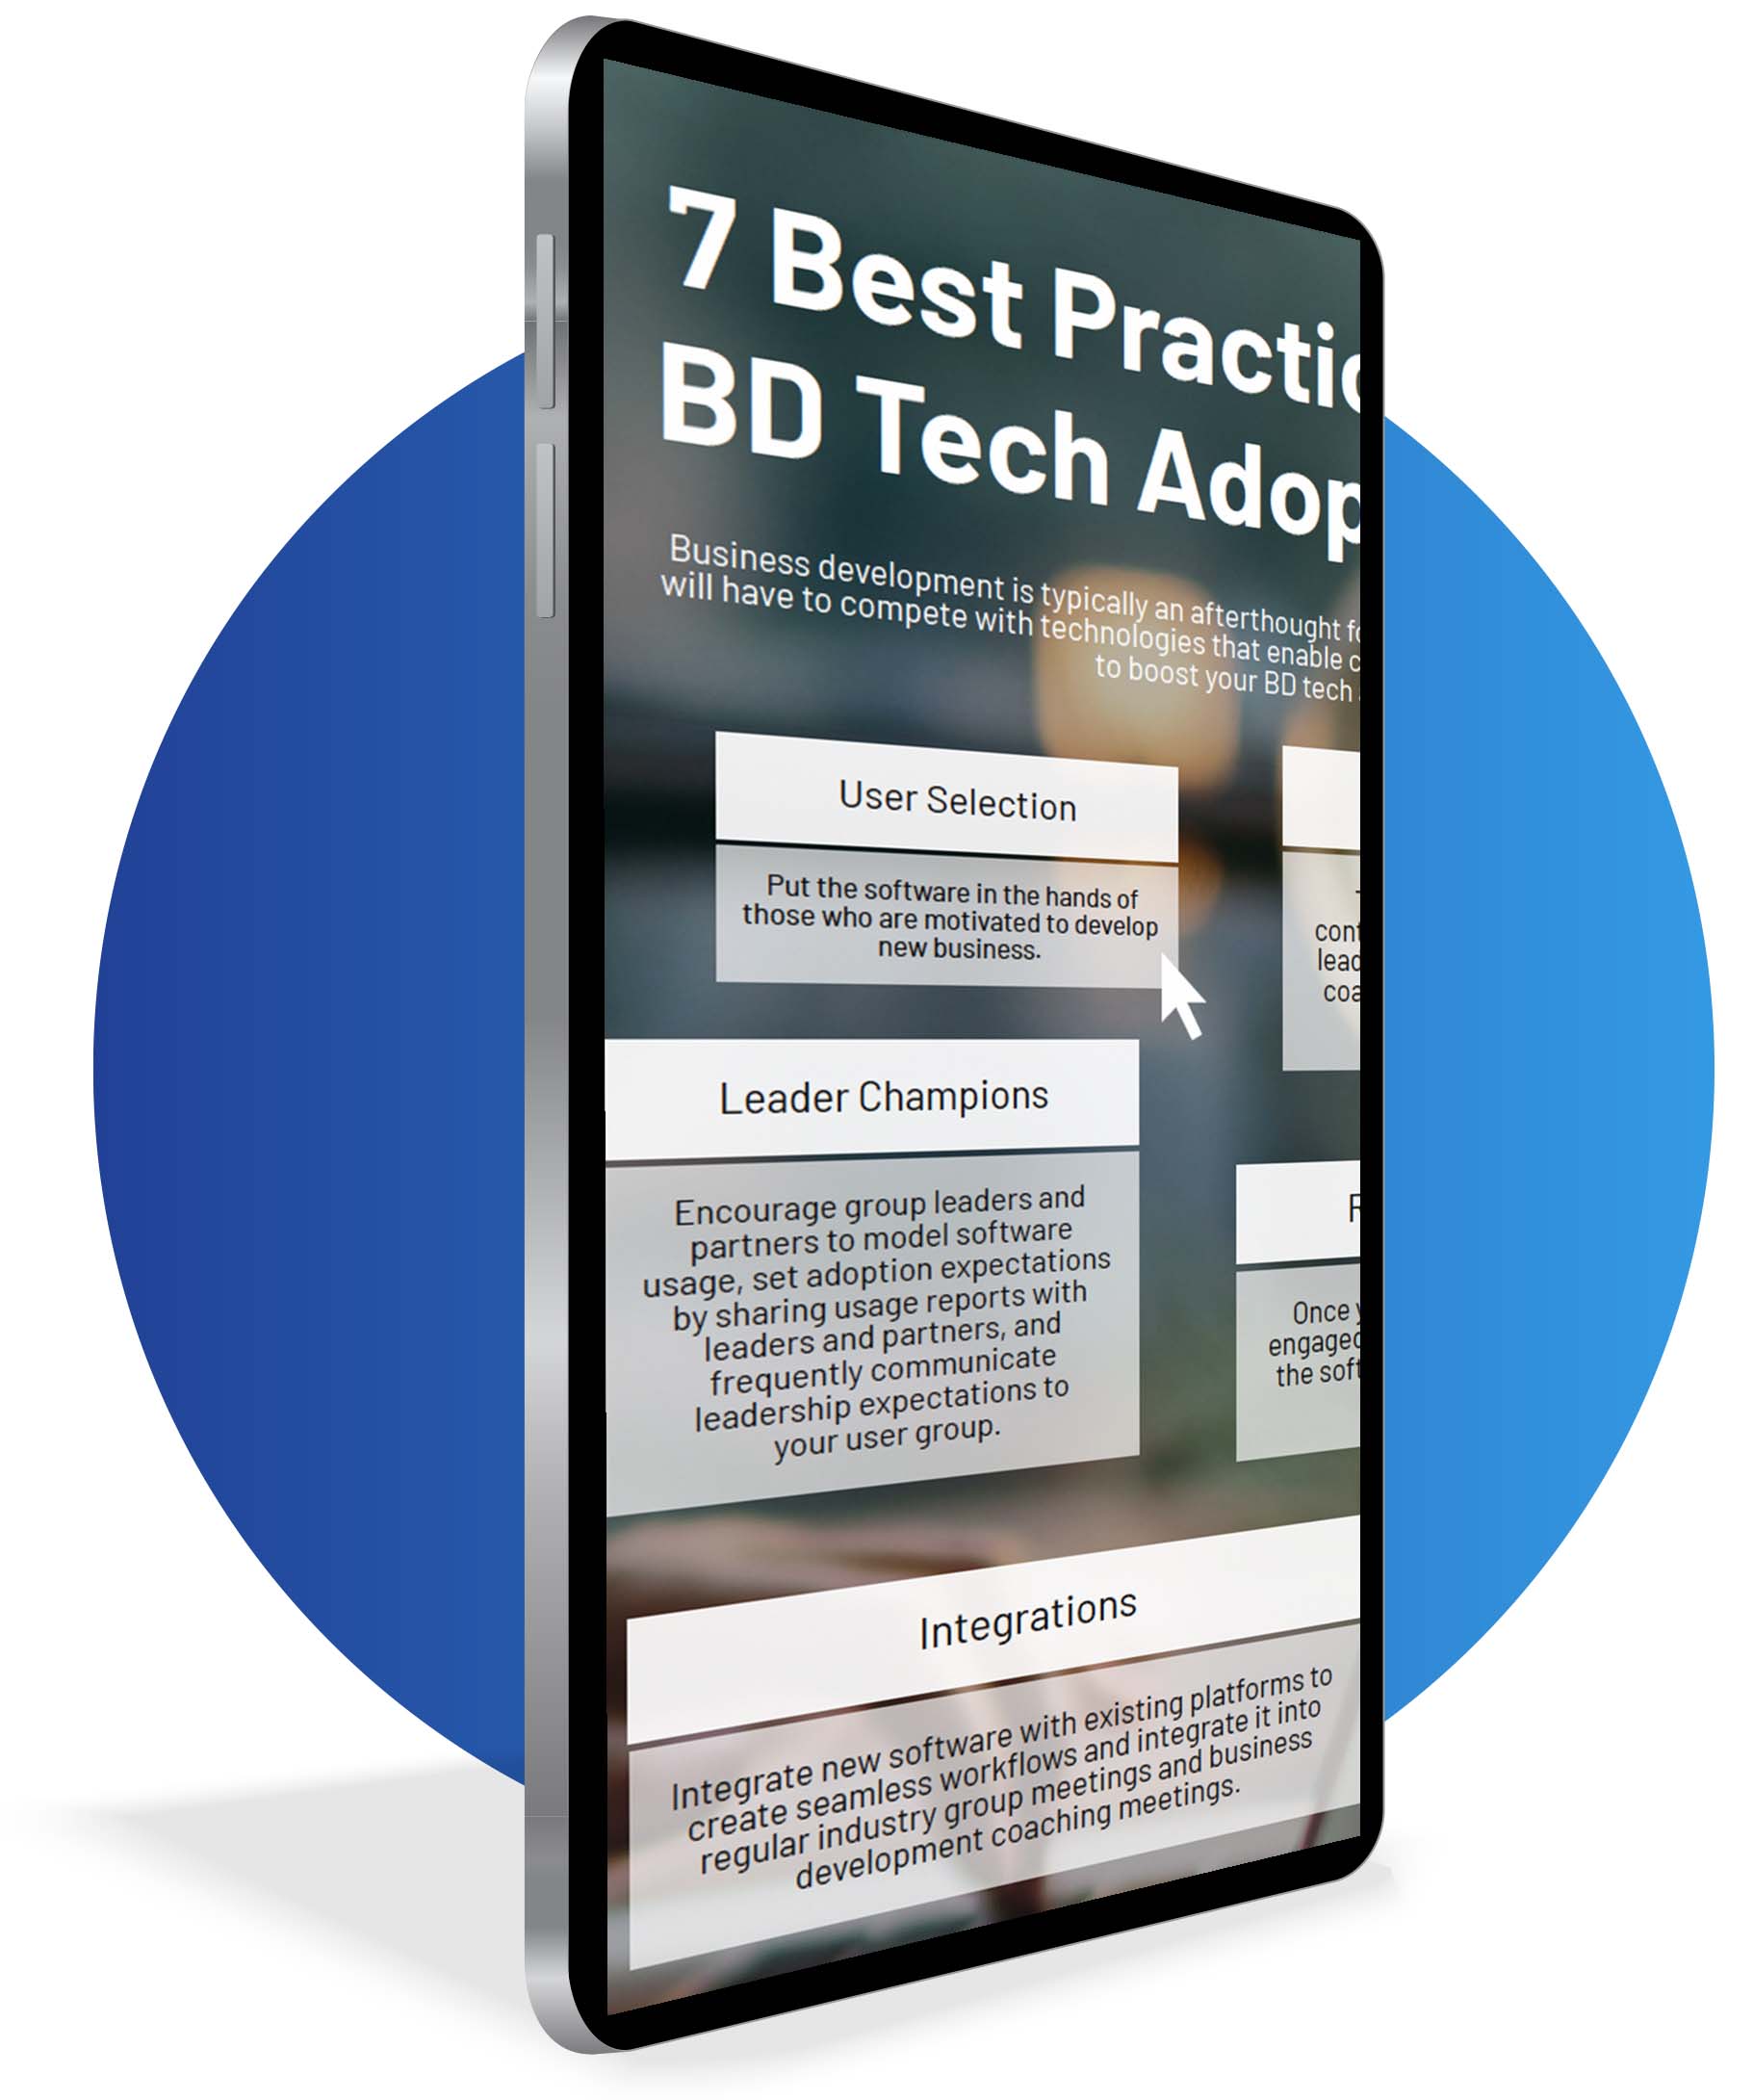 7 Best Practices to Boost BD Tech Adoption in 2022